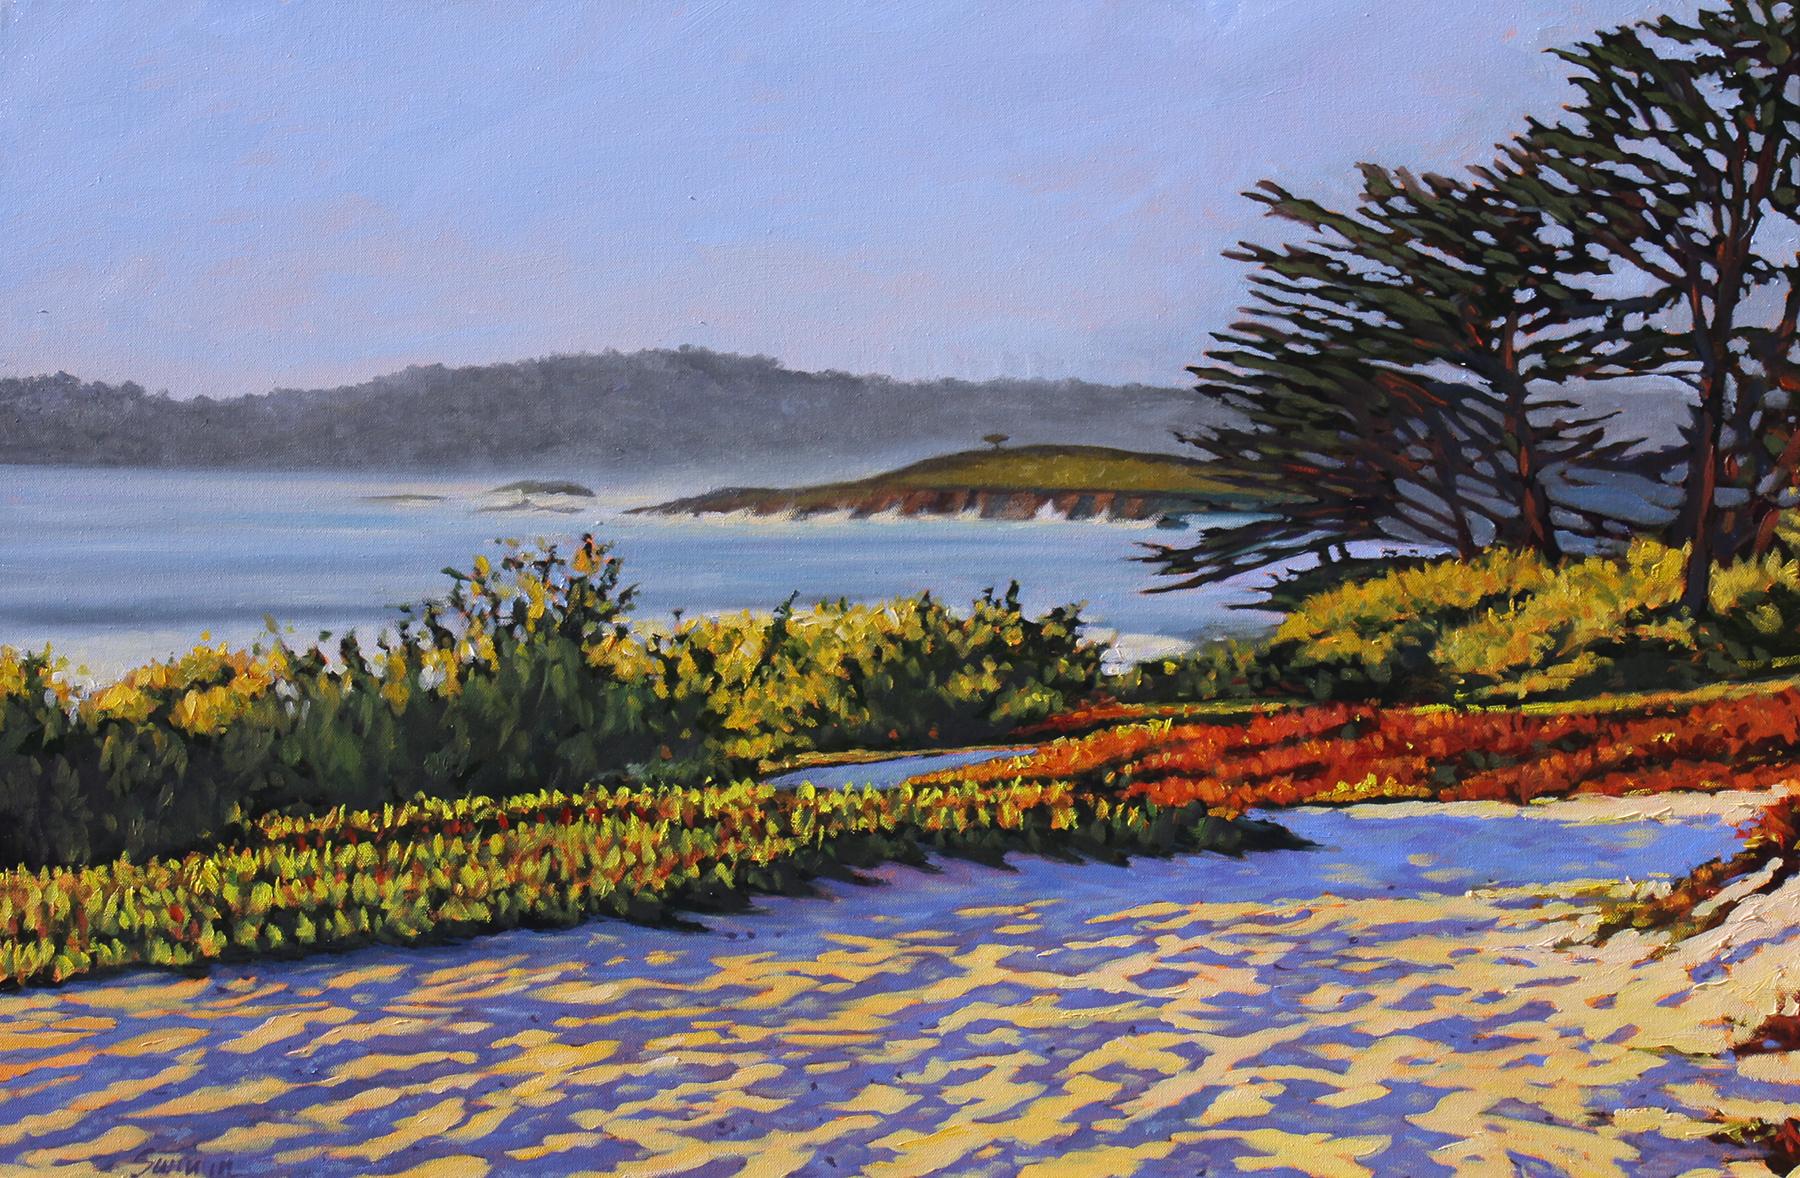 Tom Swimm Landscape Painting -  "Carmel Memories" Central Coast Seascape Scene Oil Painting In Afternoon Light